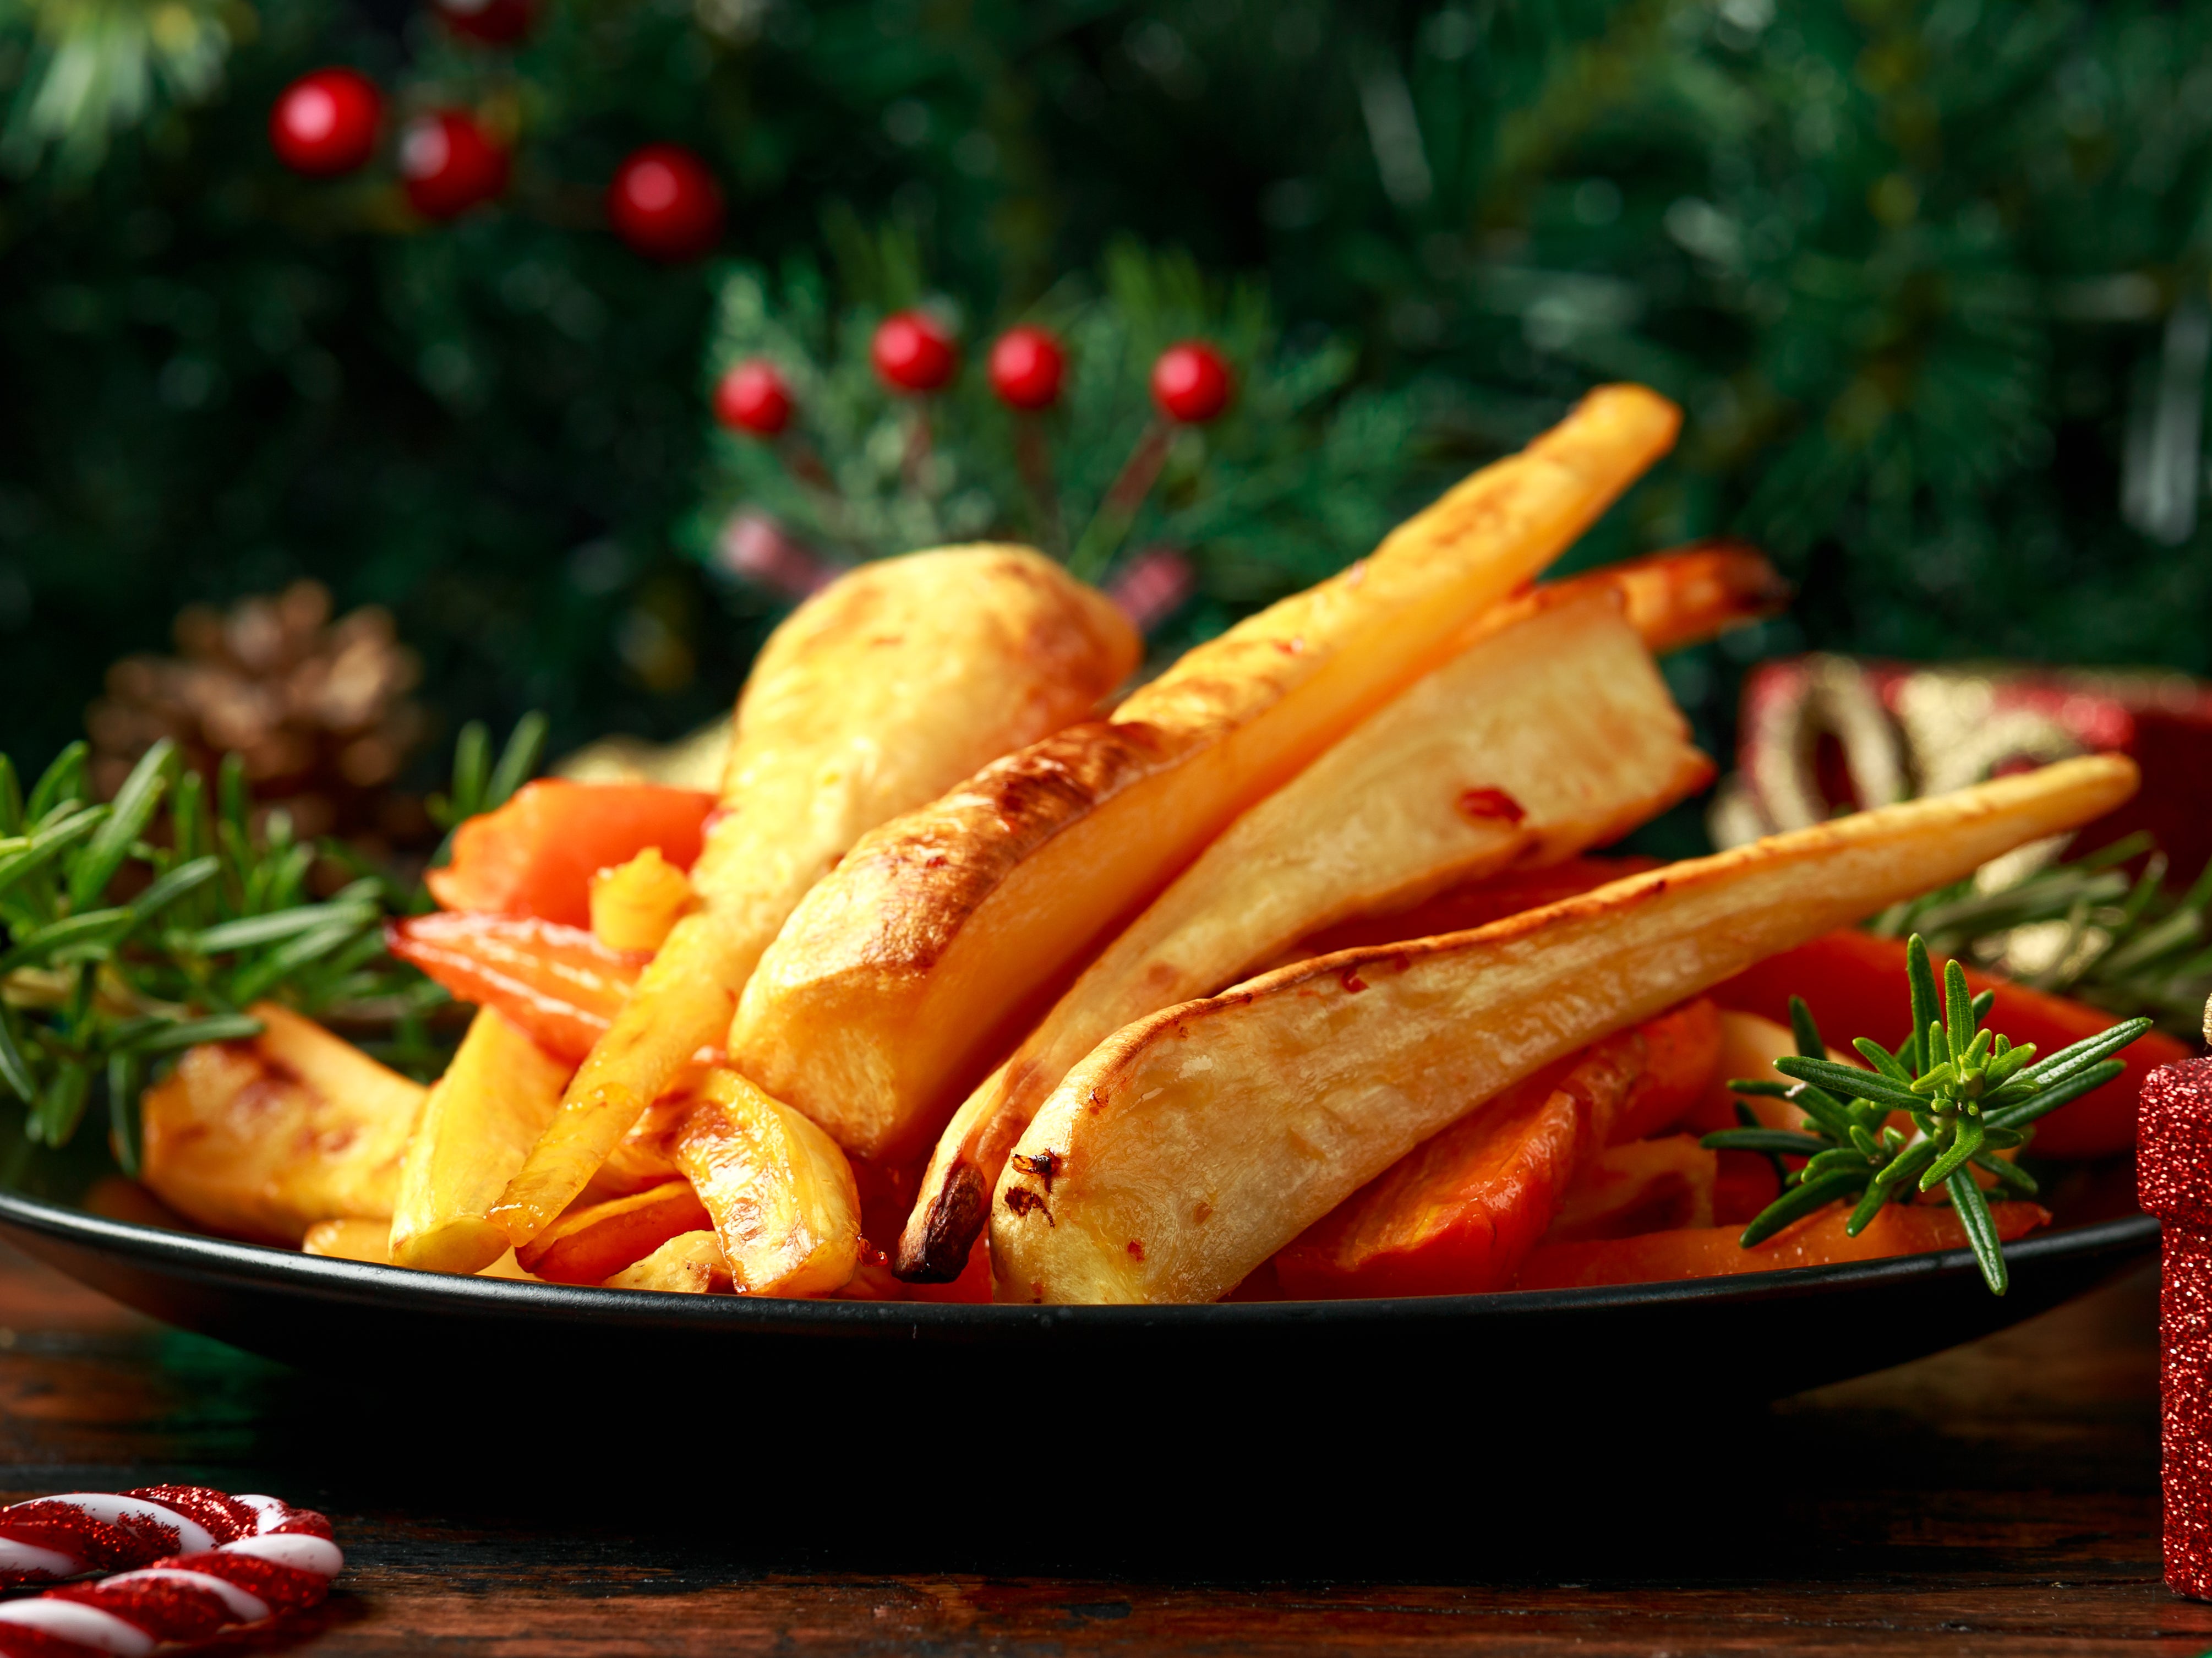 Parsnips are great for growing at this time of year and are a perfect addition to your Christmas lunch